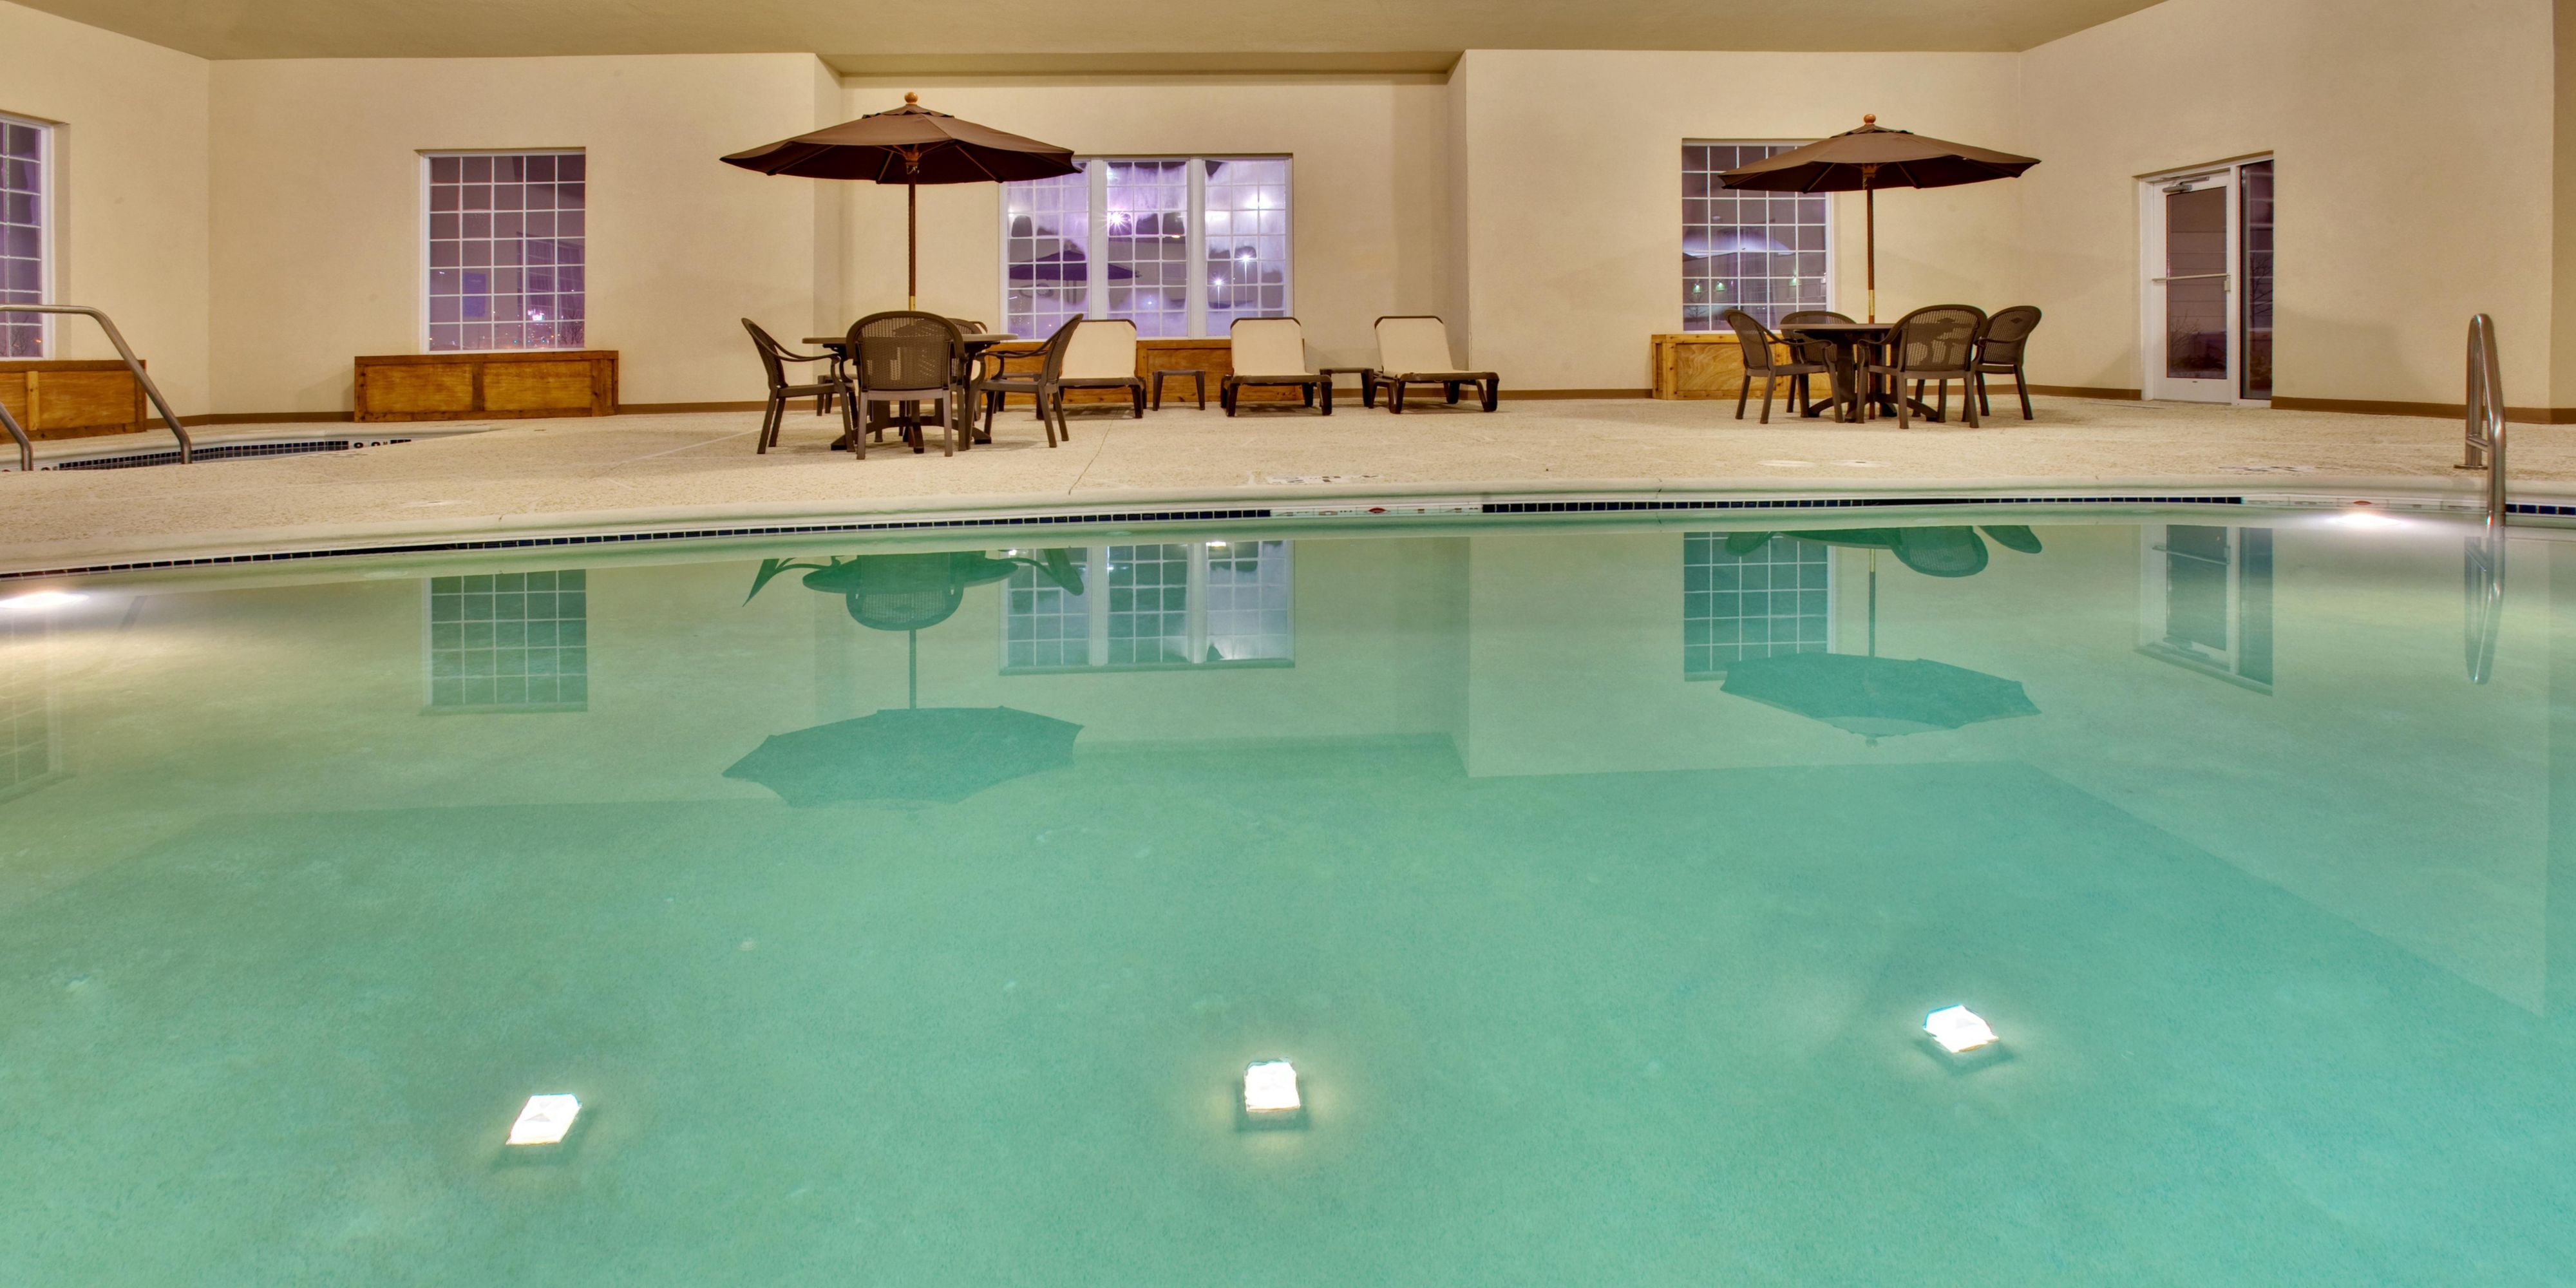 Beat the cold or heat! Relax, and unwind in our indoor pool and hot tub!